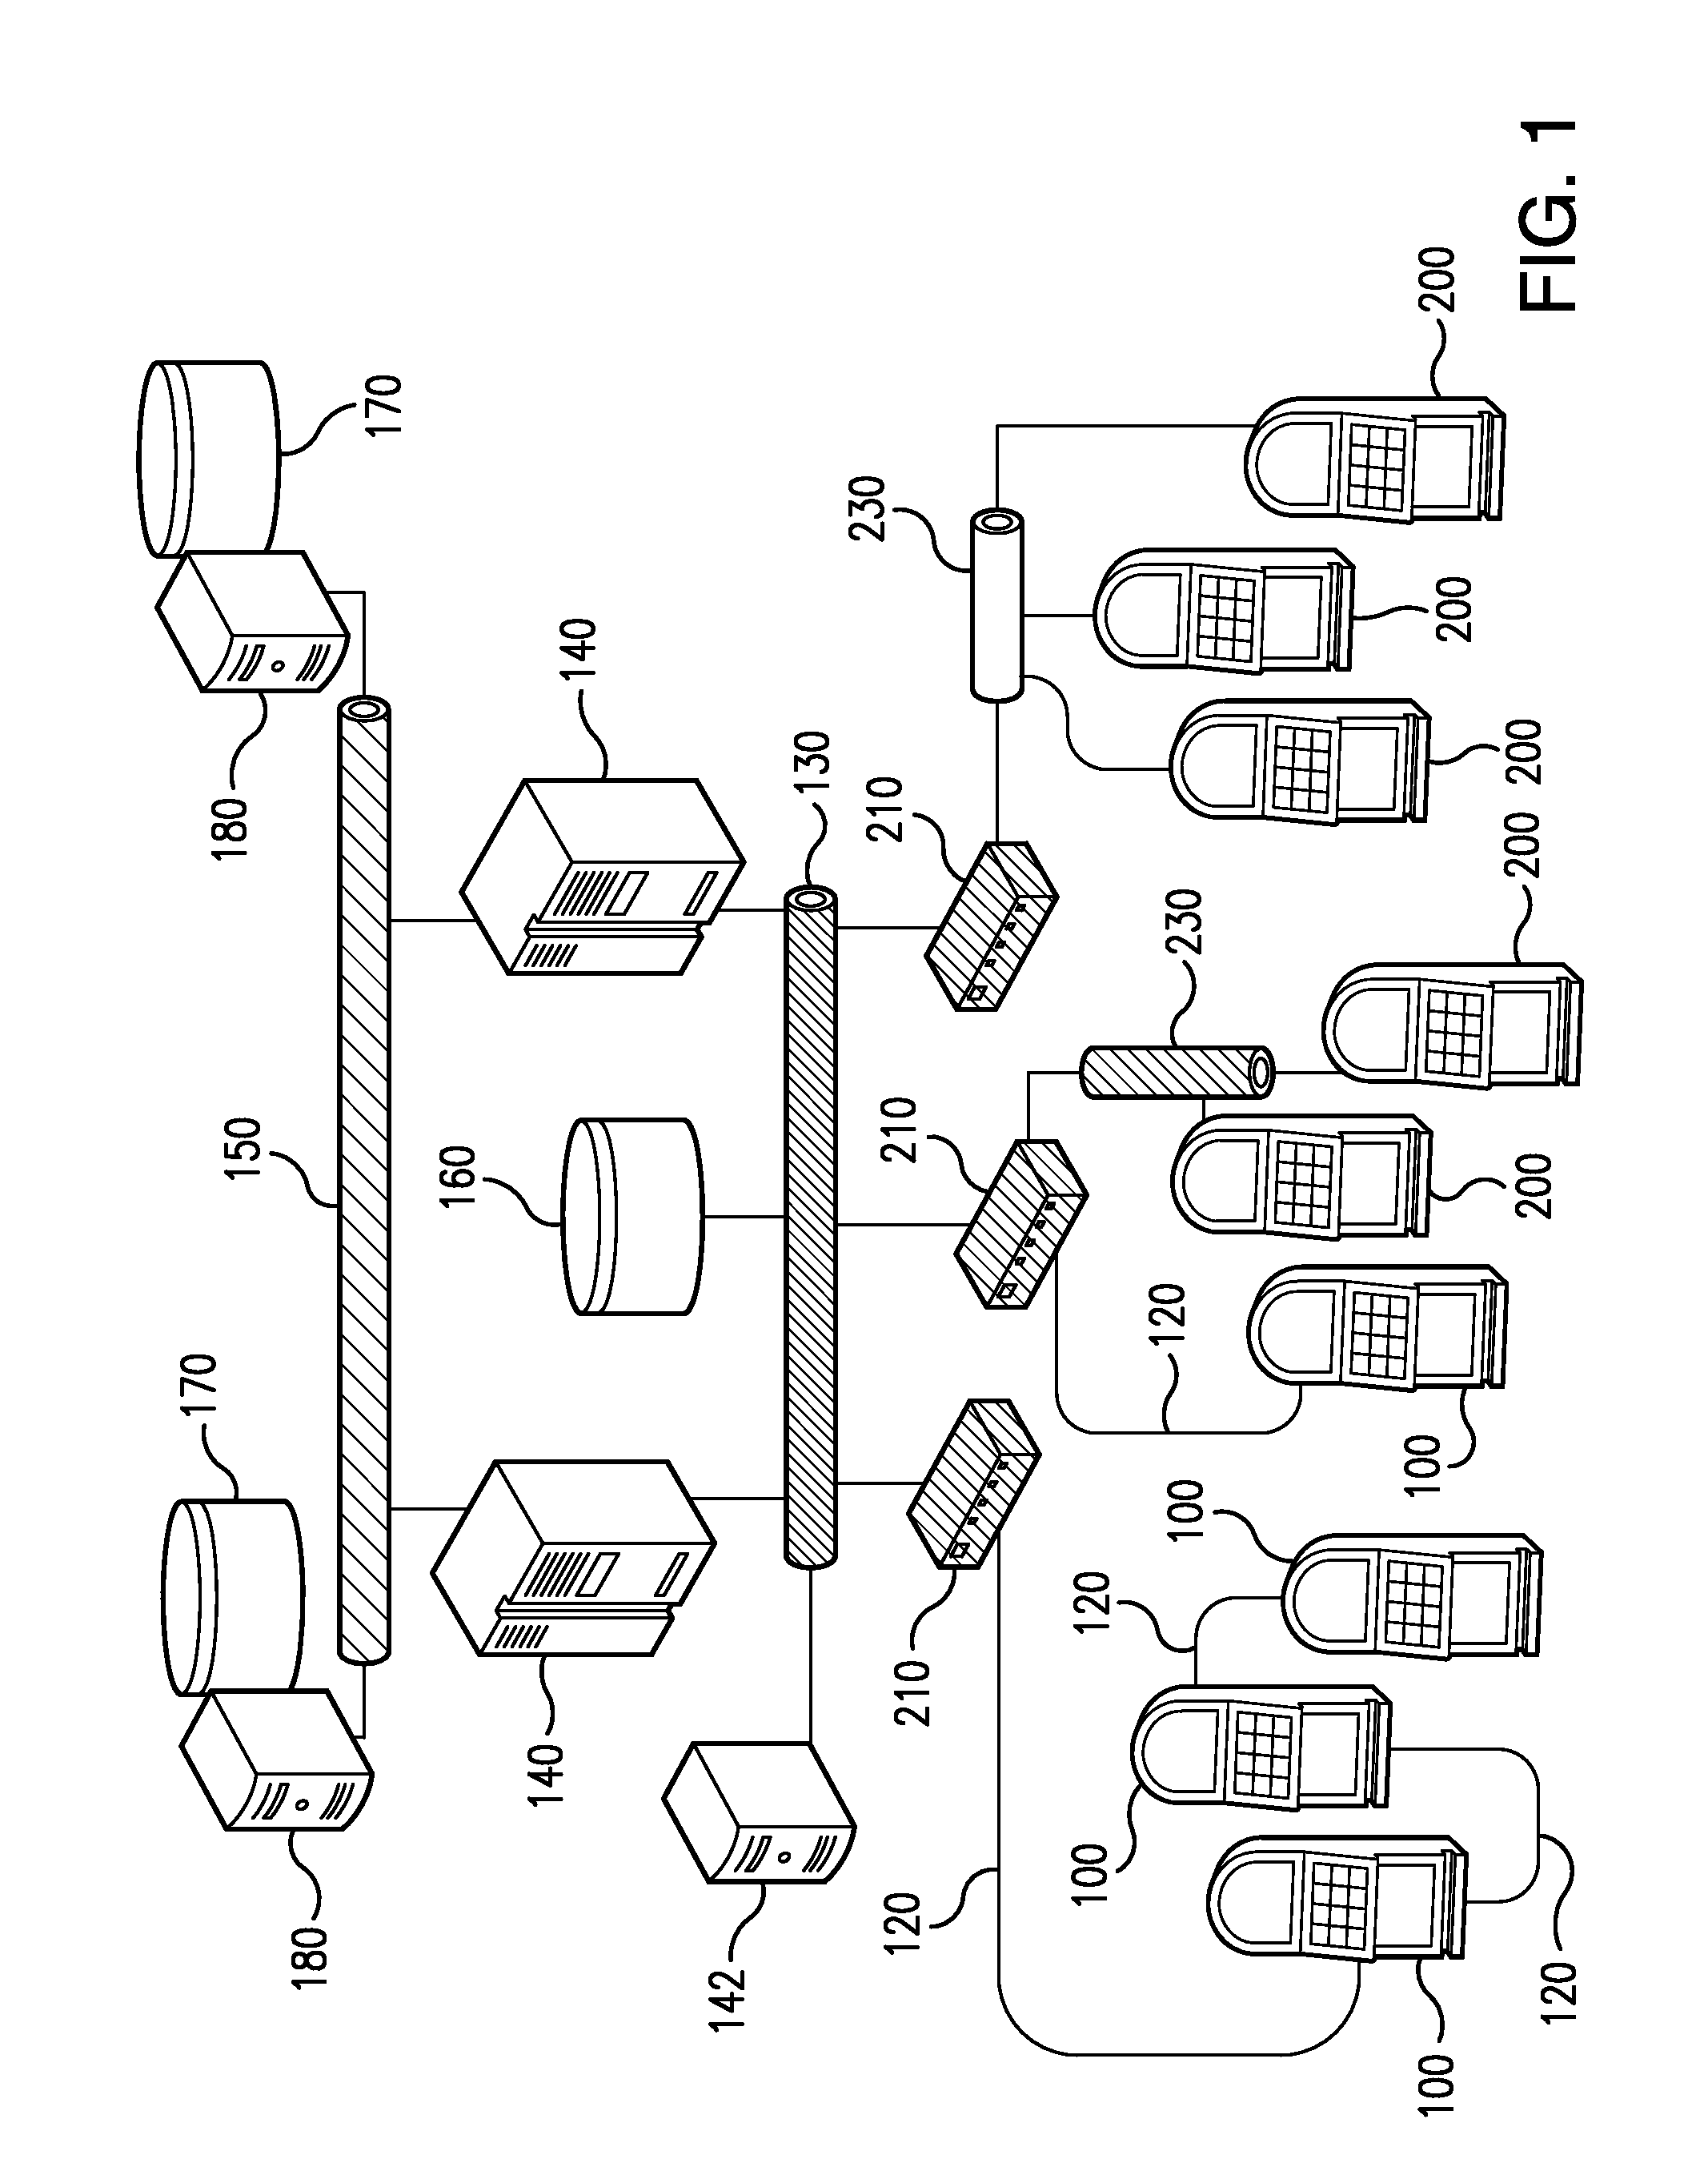 Affiliated gaming system and method